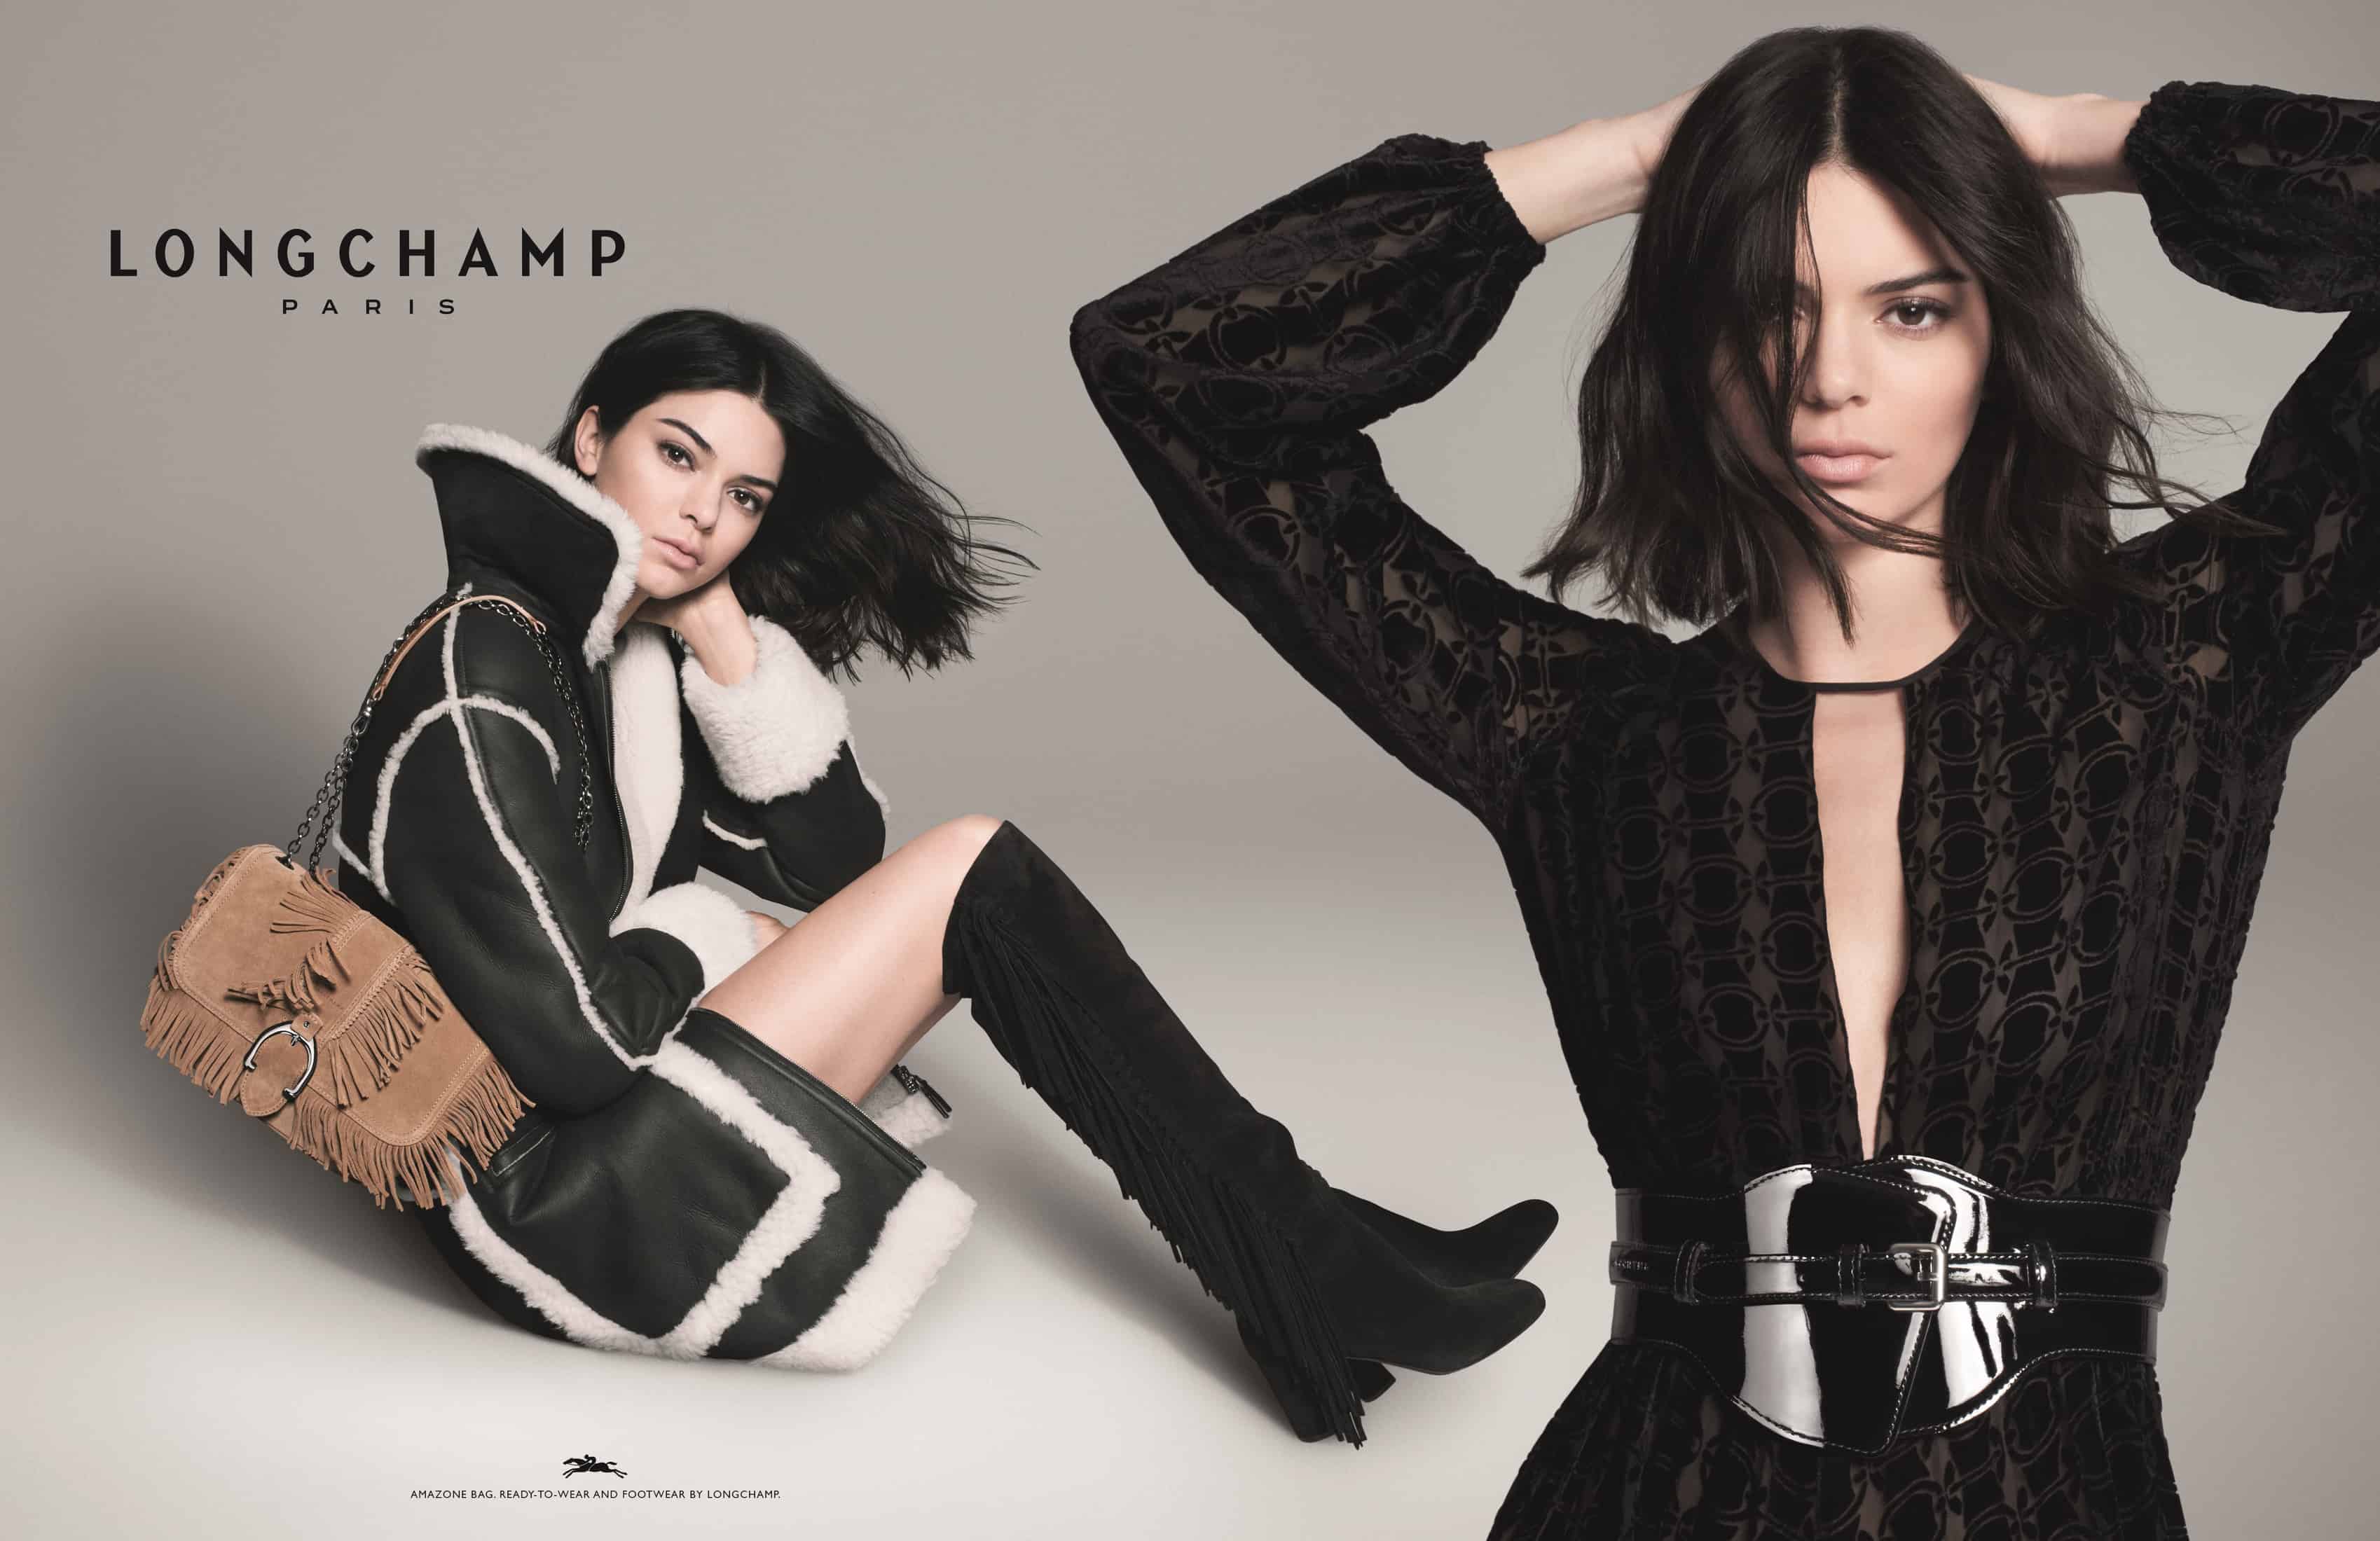 Keeping up with Kendall Jenner and her Longchamp bags